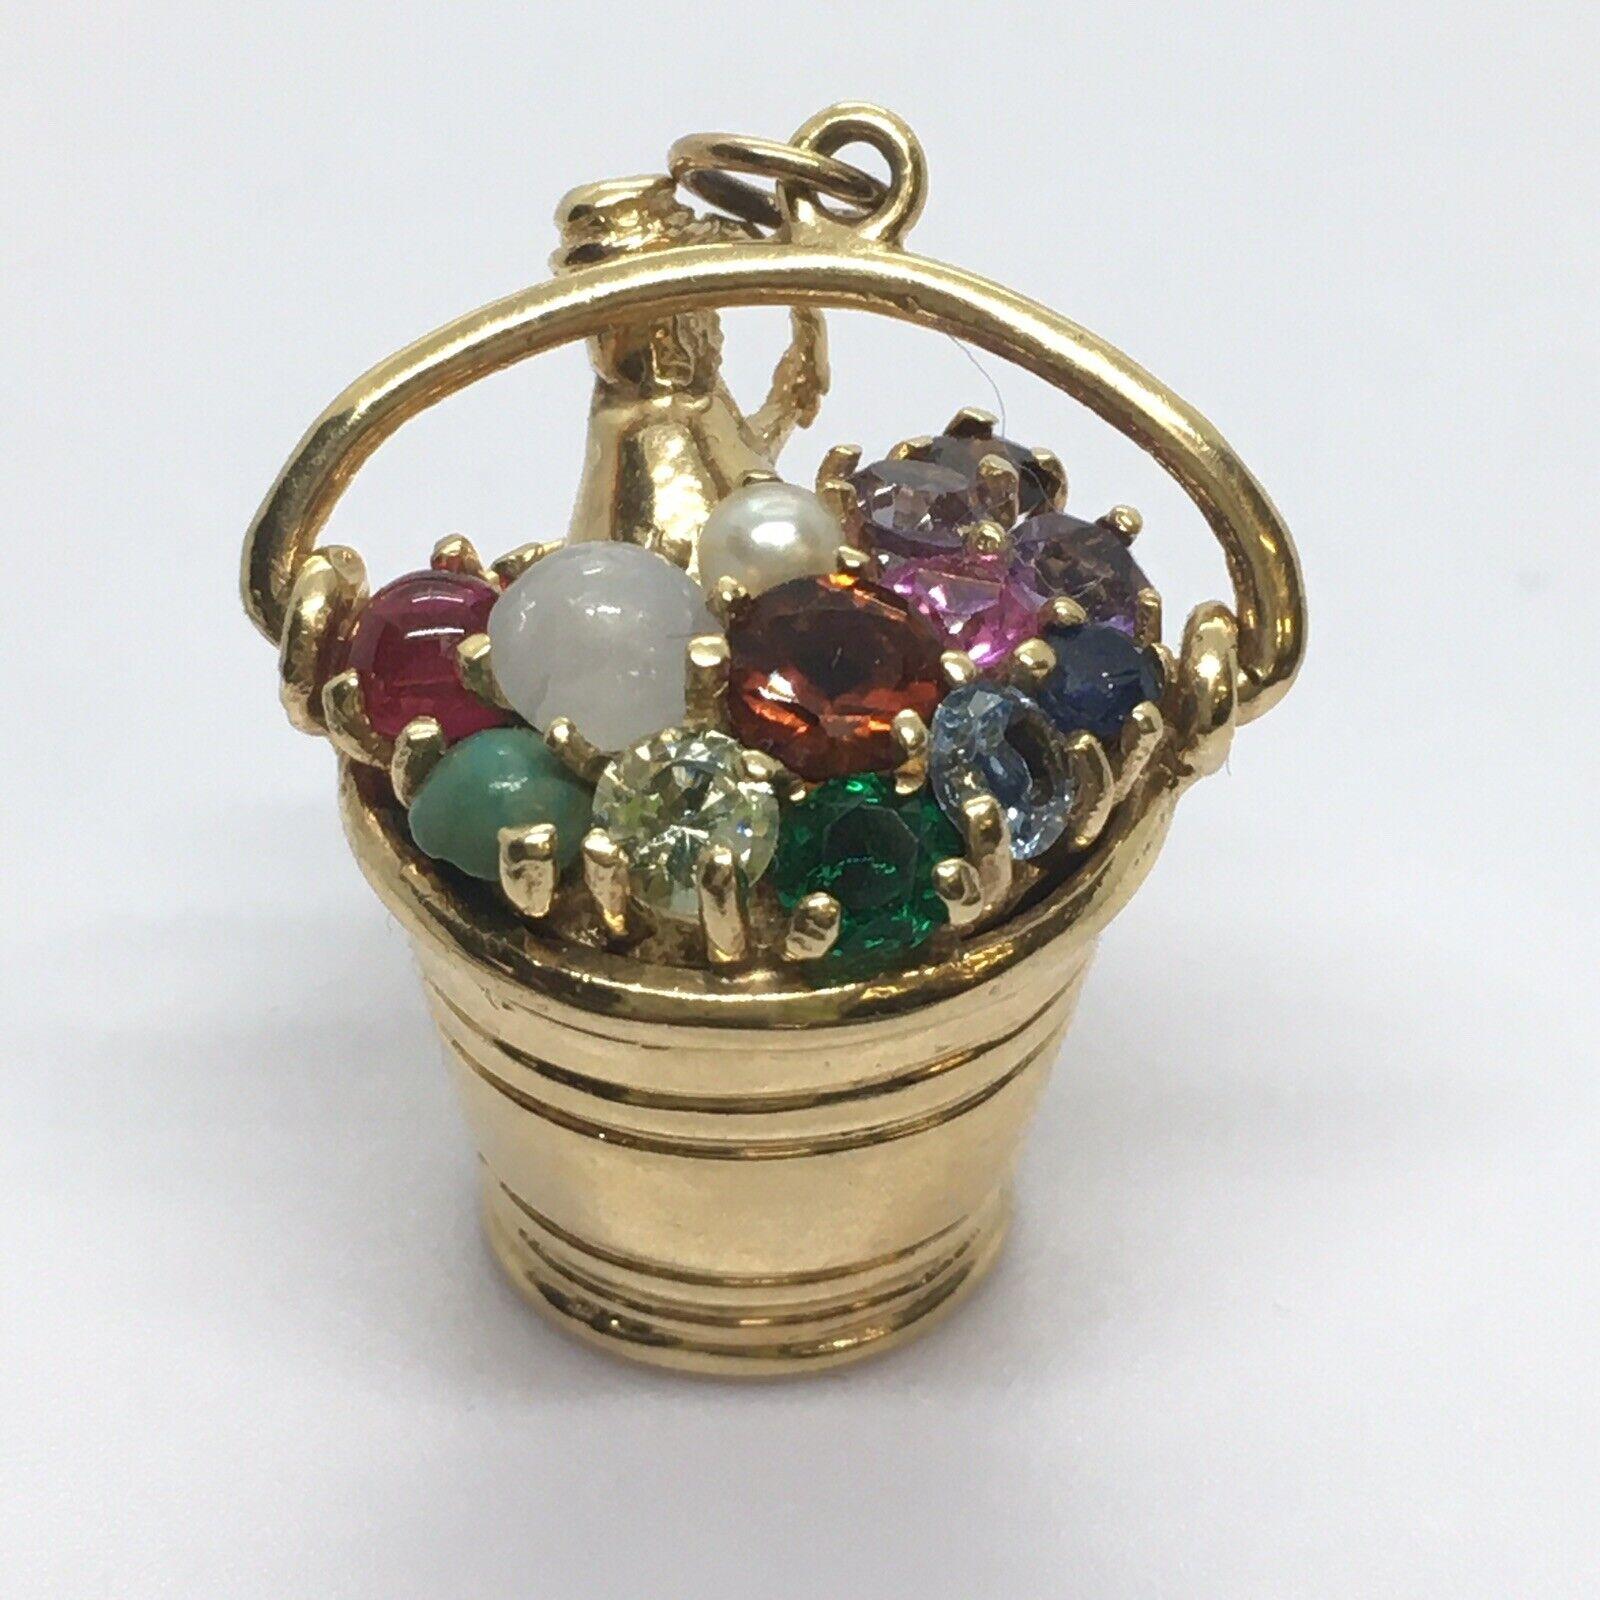 Vintage Bucket Of Champagne Charm 14K Gold Circa 1960s American Gem set Ruby

Weighting 12.3 gram
Hanging 1.25 inch 
Bucket 1/2 inch on bottom 3/4 inch on top
Marked 